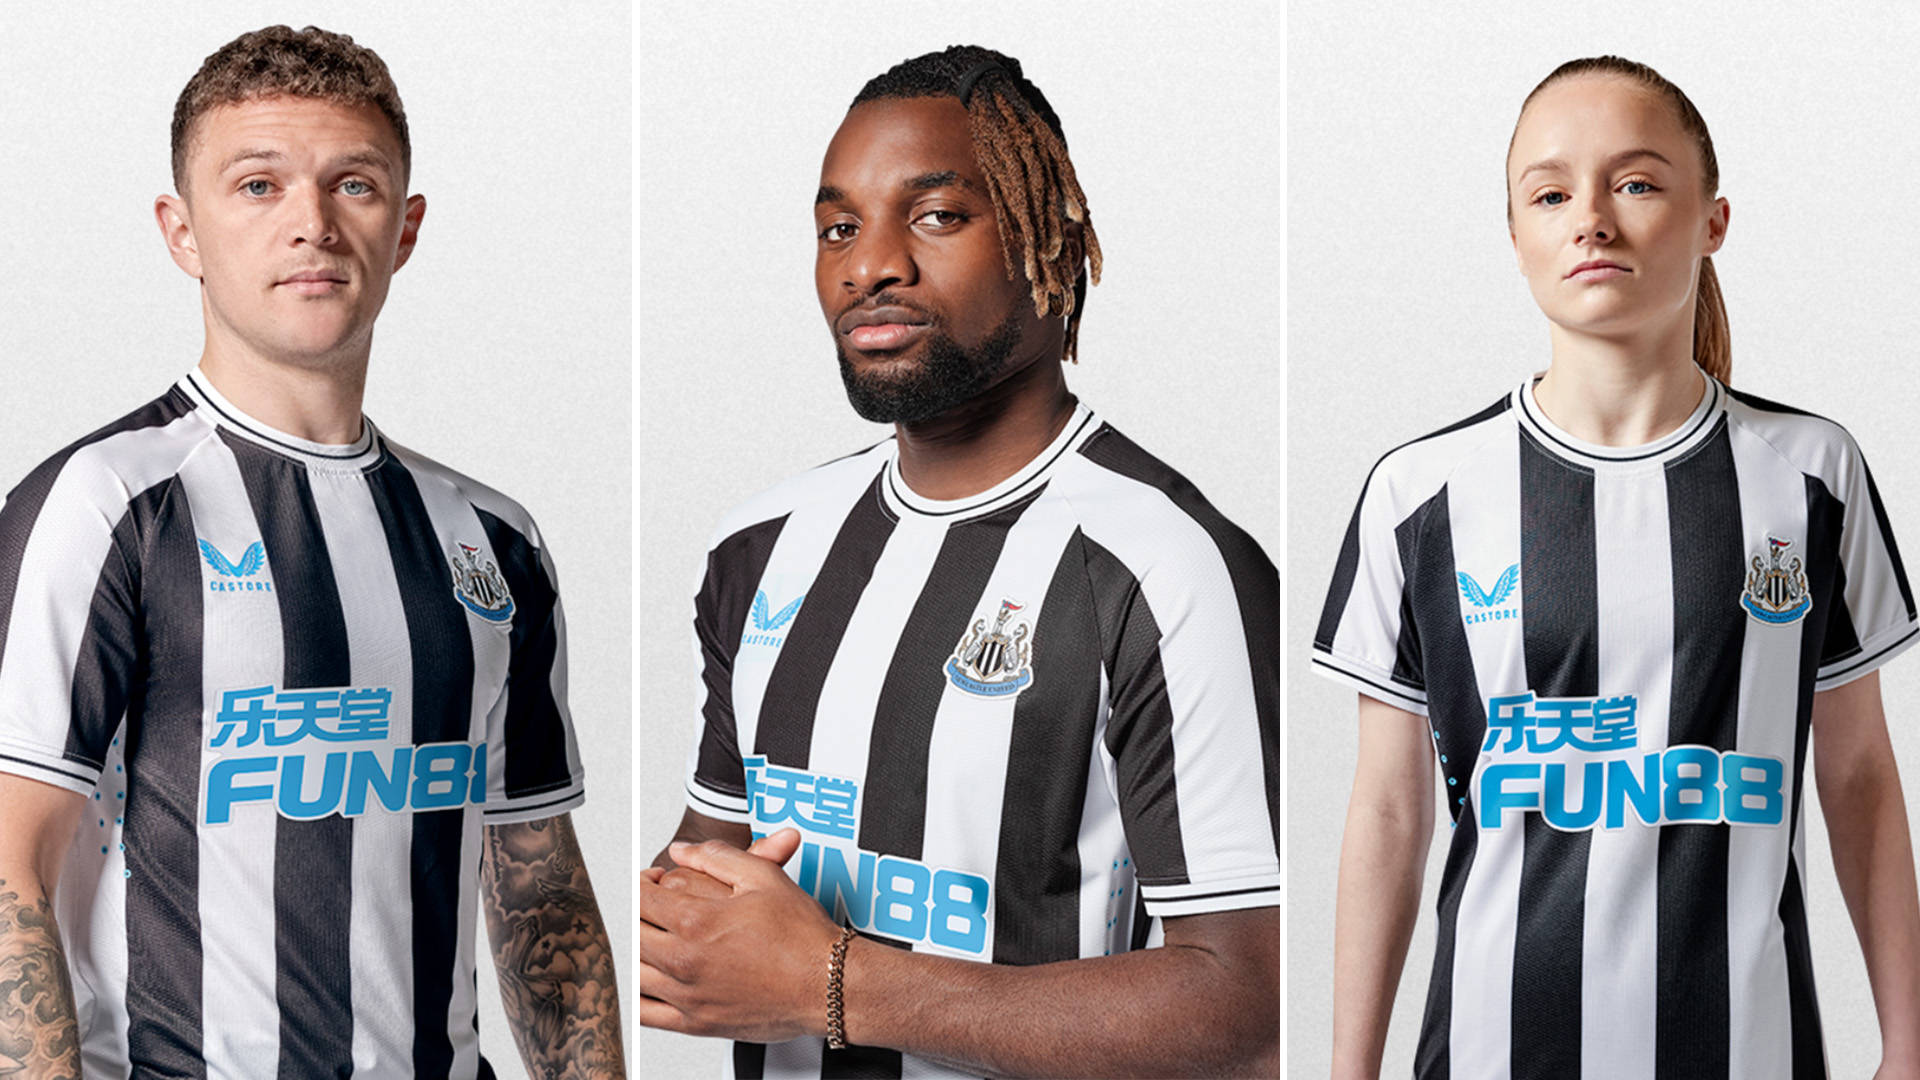 Newcastle United FC players donned in their iconic black and white uniform. Wallpaper